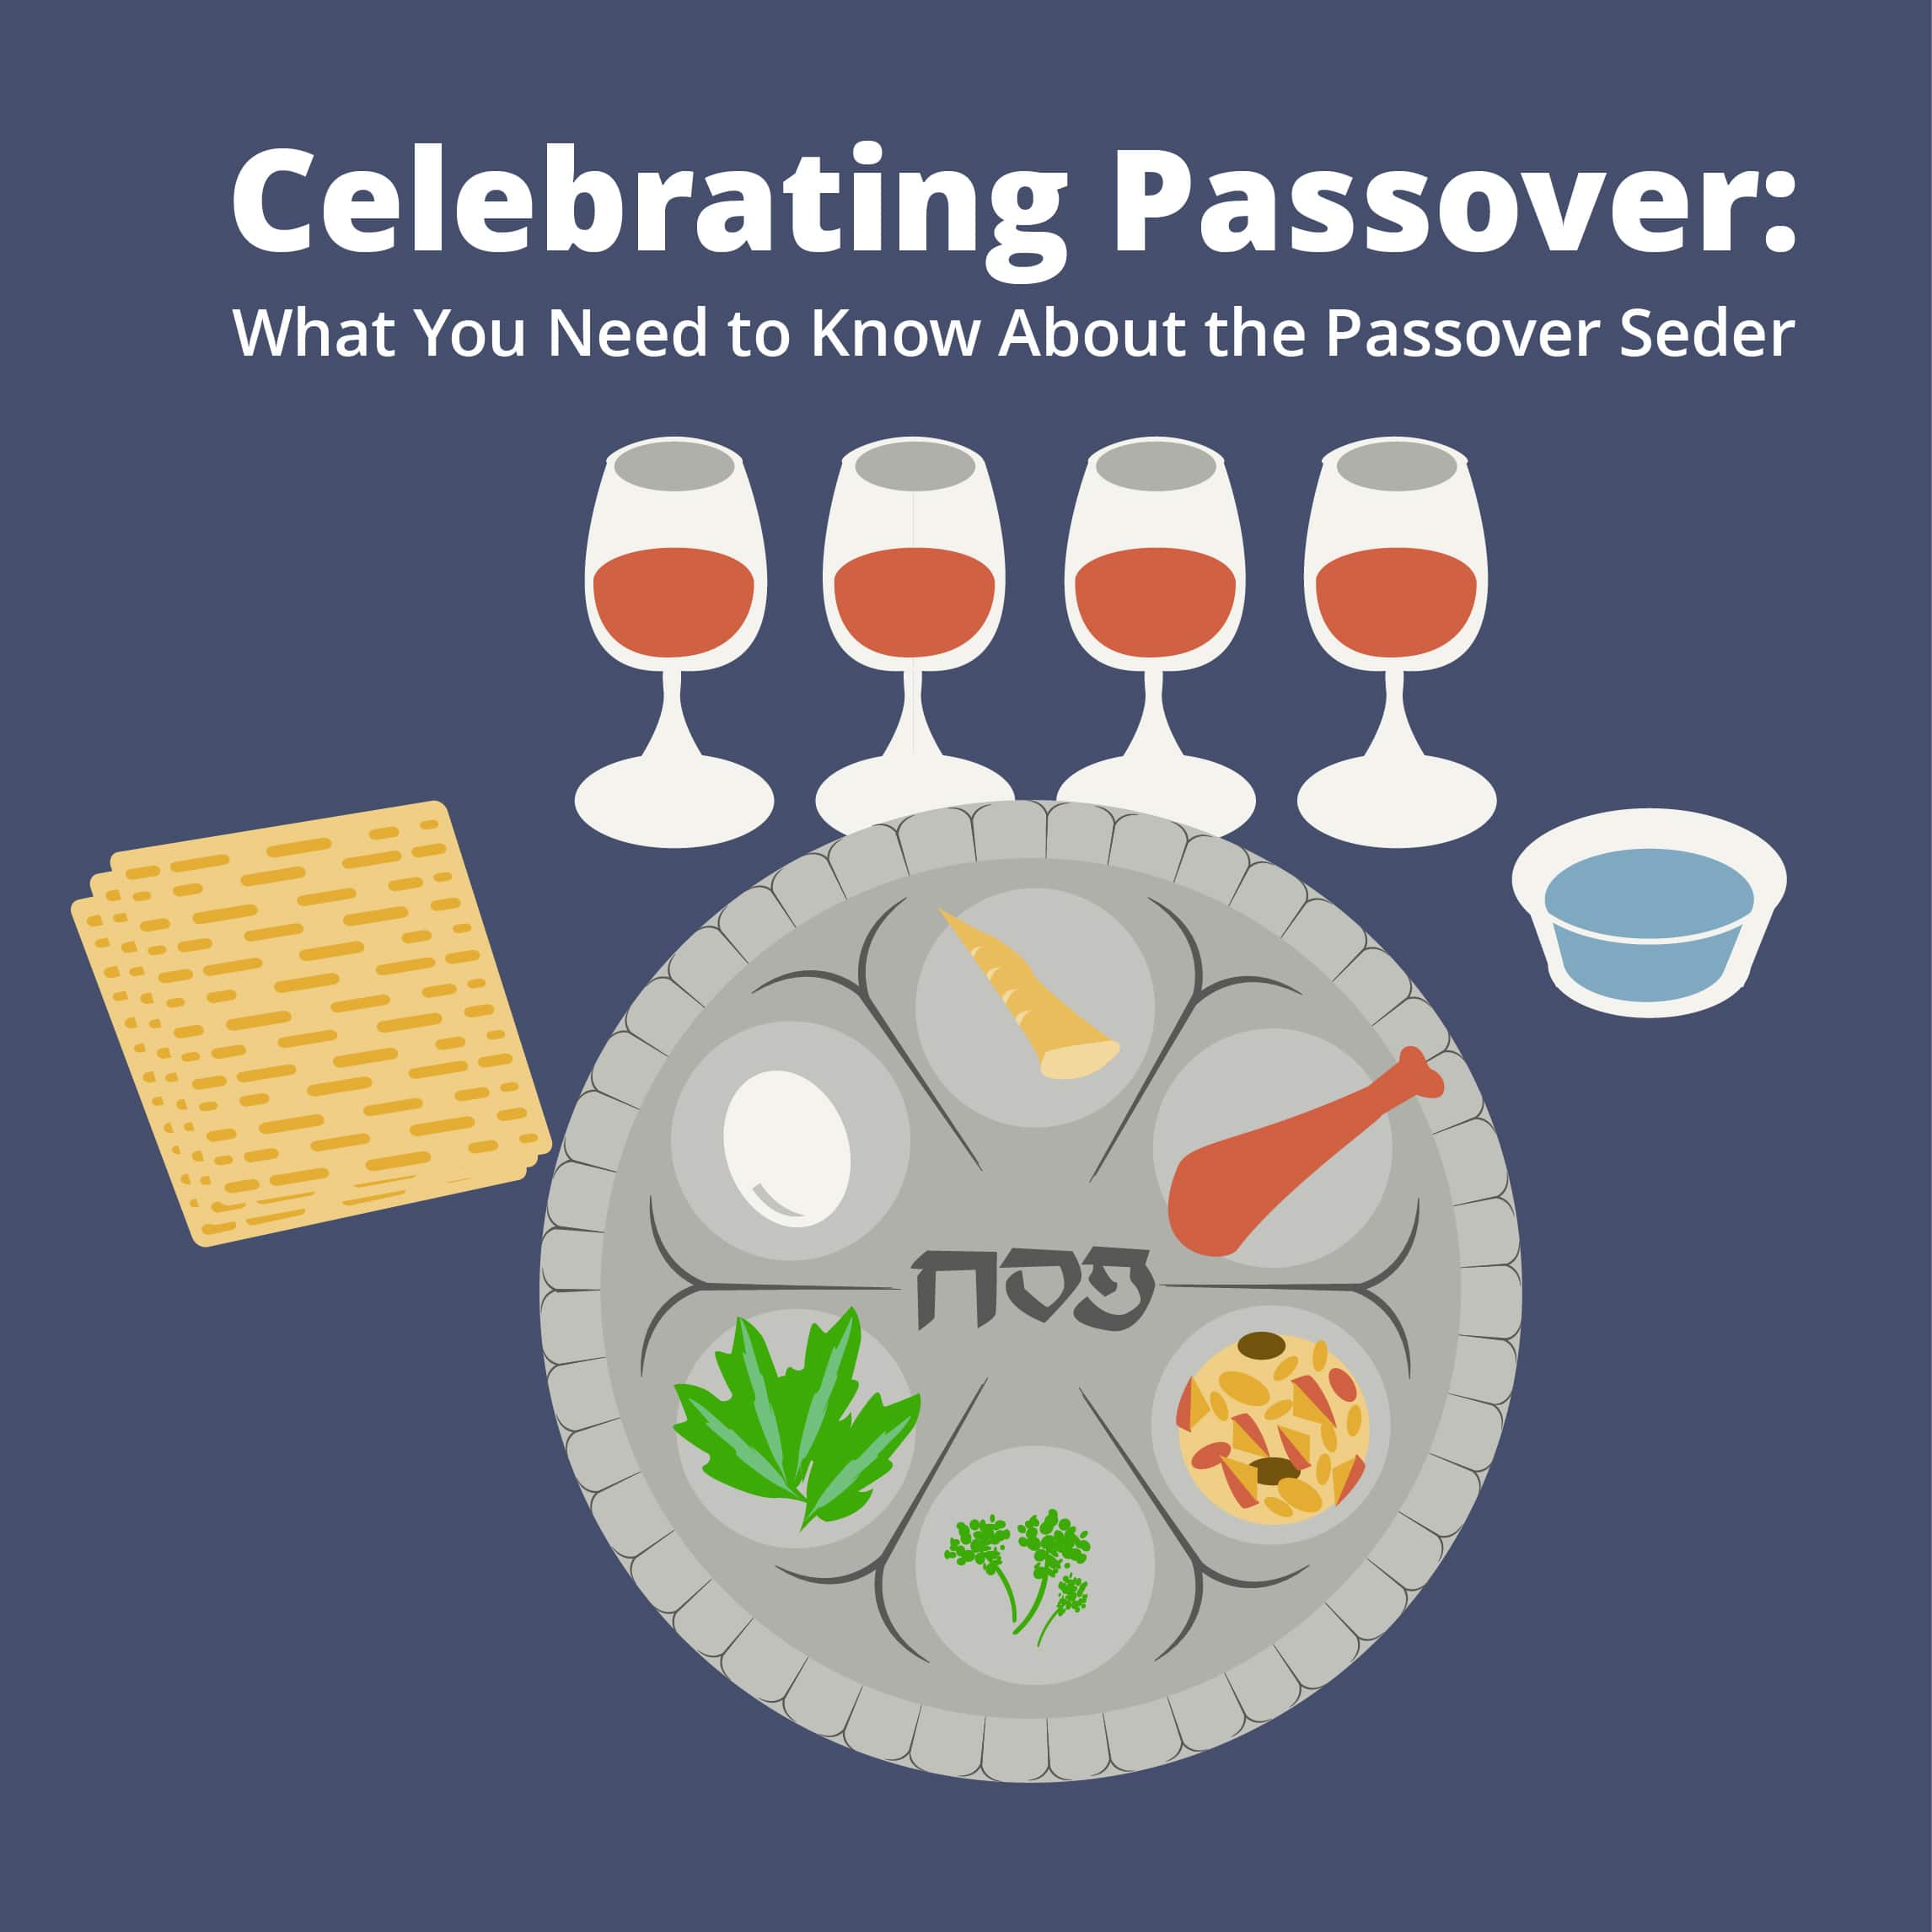 » Celebrating Passover What You Need to Know About the Passover Seder